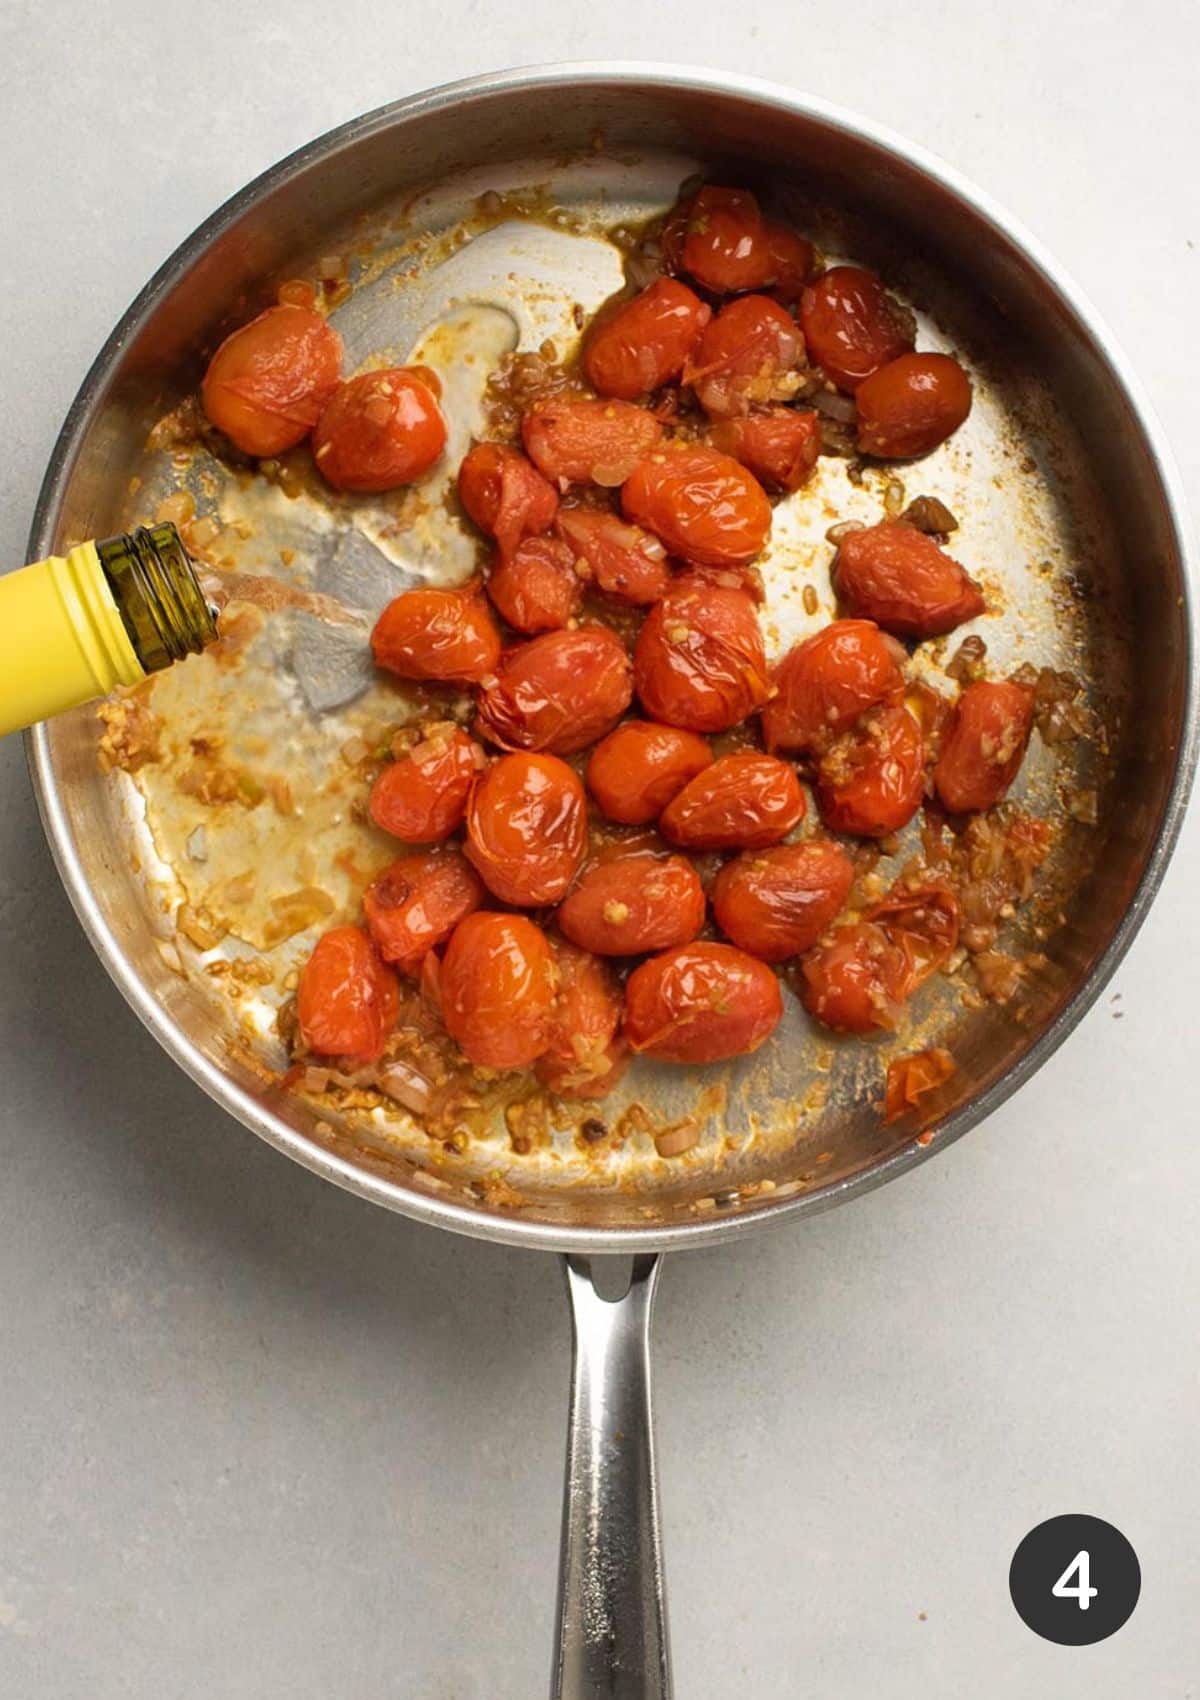 Pouring white wine into a skillet with burst tomatoes.